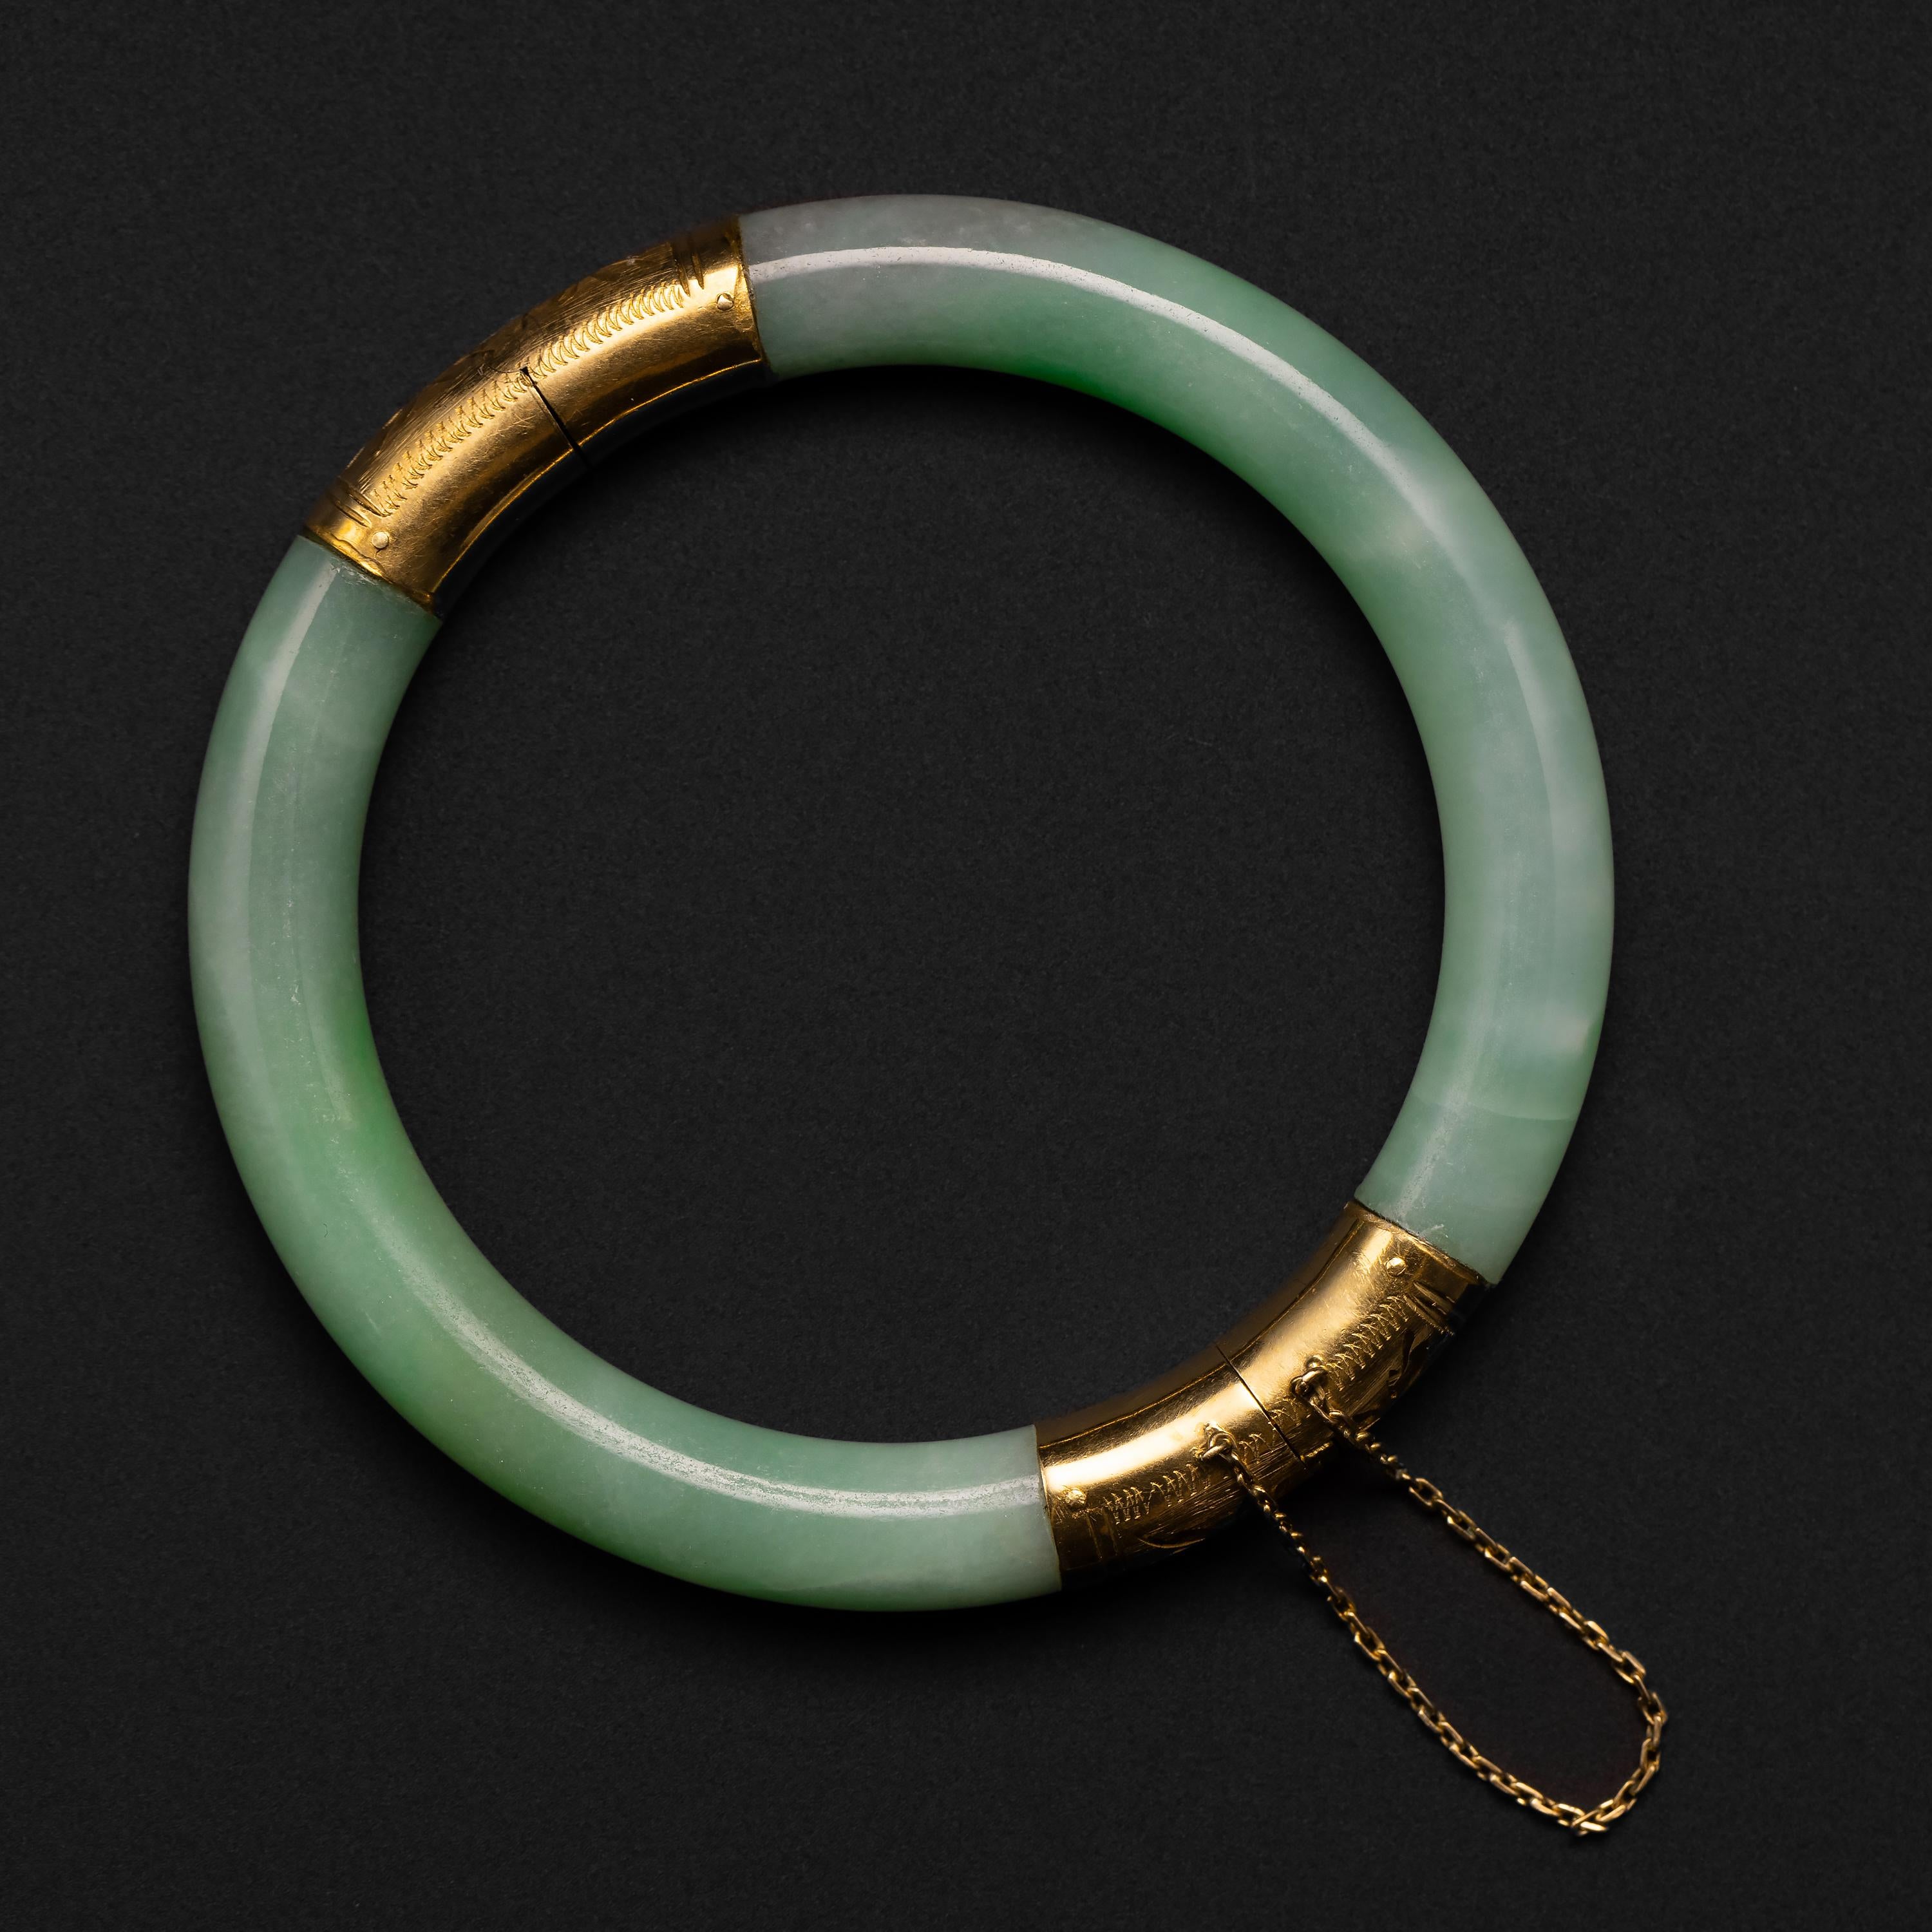 Dating to the Midcentury (circa 1970s), this bright apple green jadeite jade bangle is GIA certified to be natural and untreated. The interior diameter is approximately 56.76mm, but because the bangle is hinged, it will fit larger wrists. A hinged